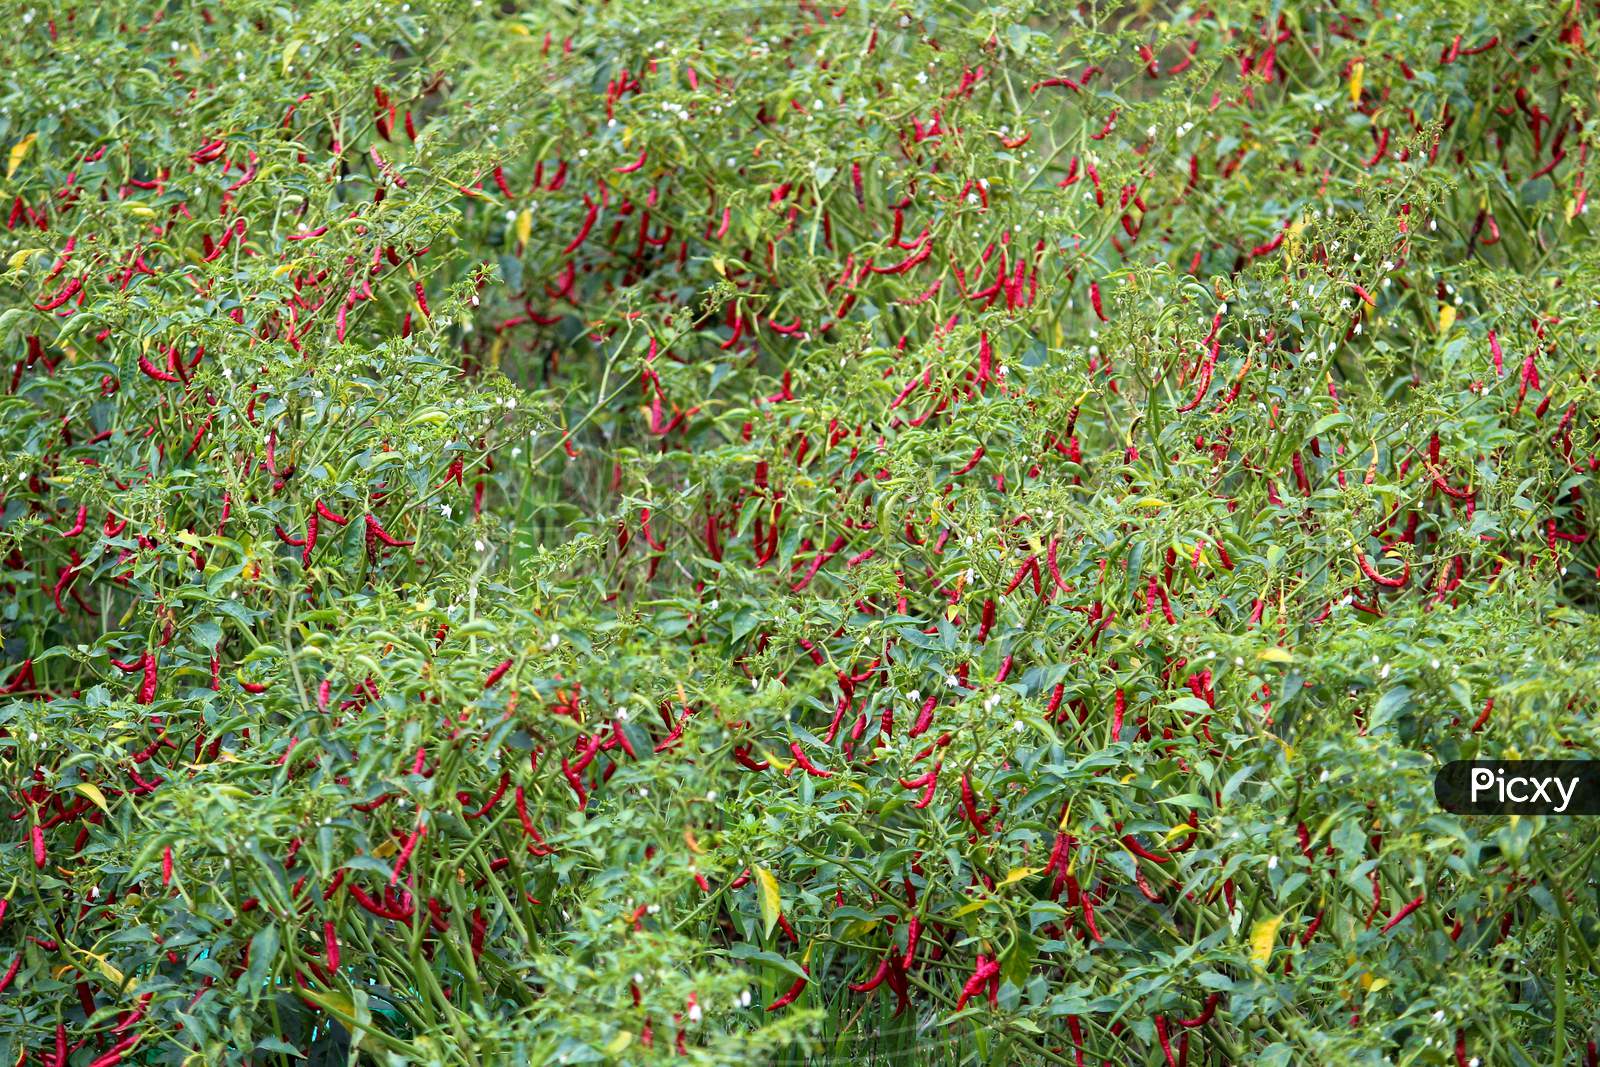 Red Chilli Fields With Red Chilli Hanging From Chilli Plants